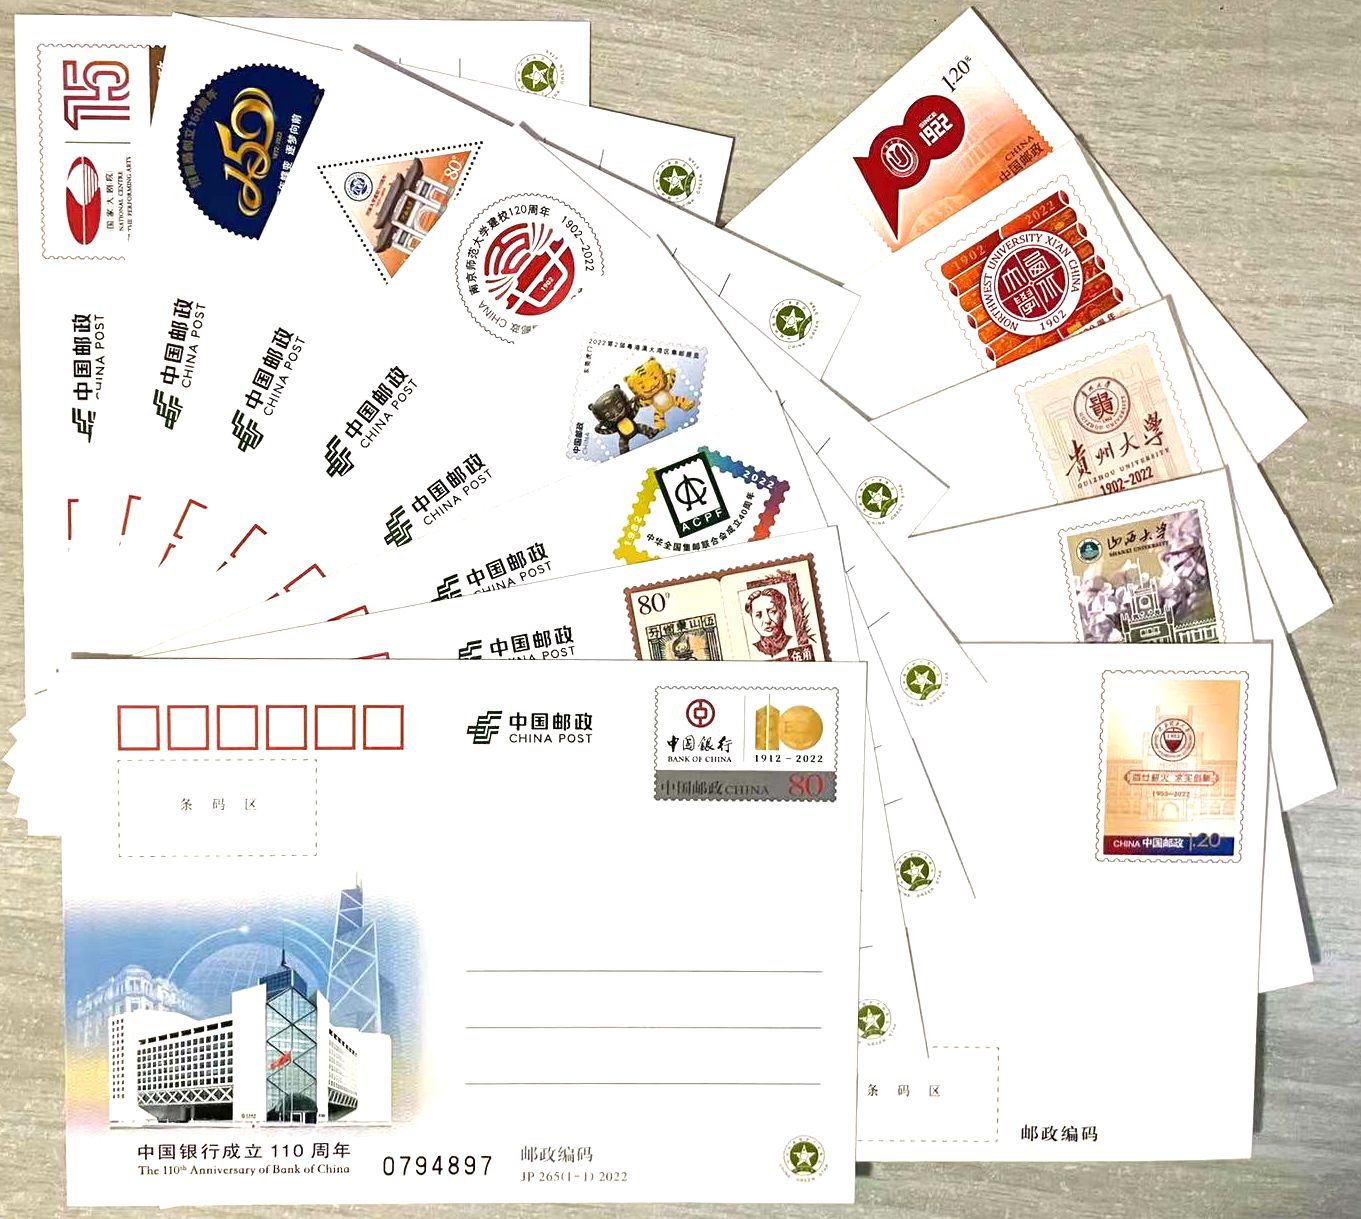 C2022, Complete China 2022 Postal Cards and Envelopes, 13 pcs